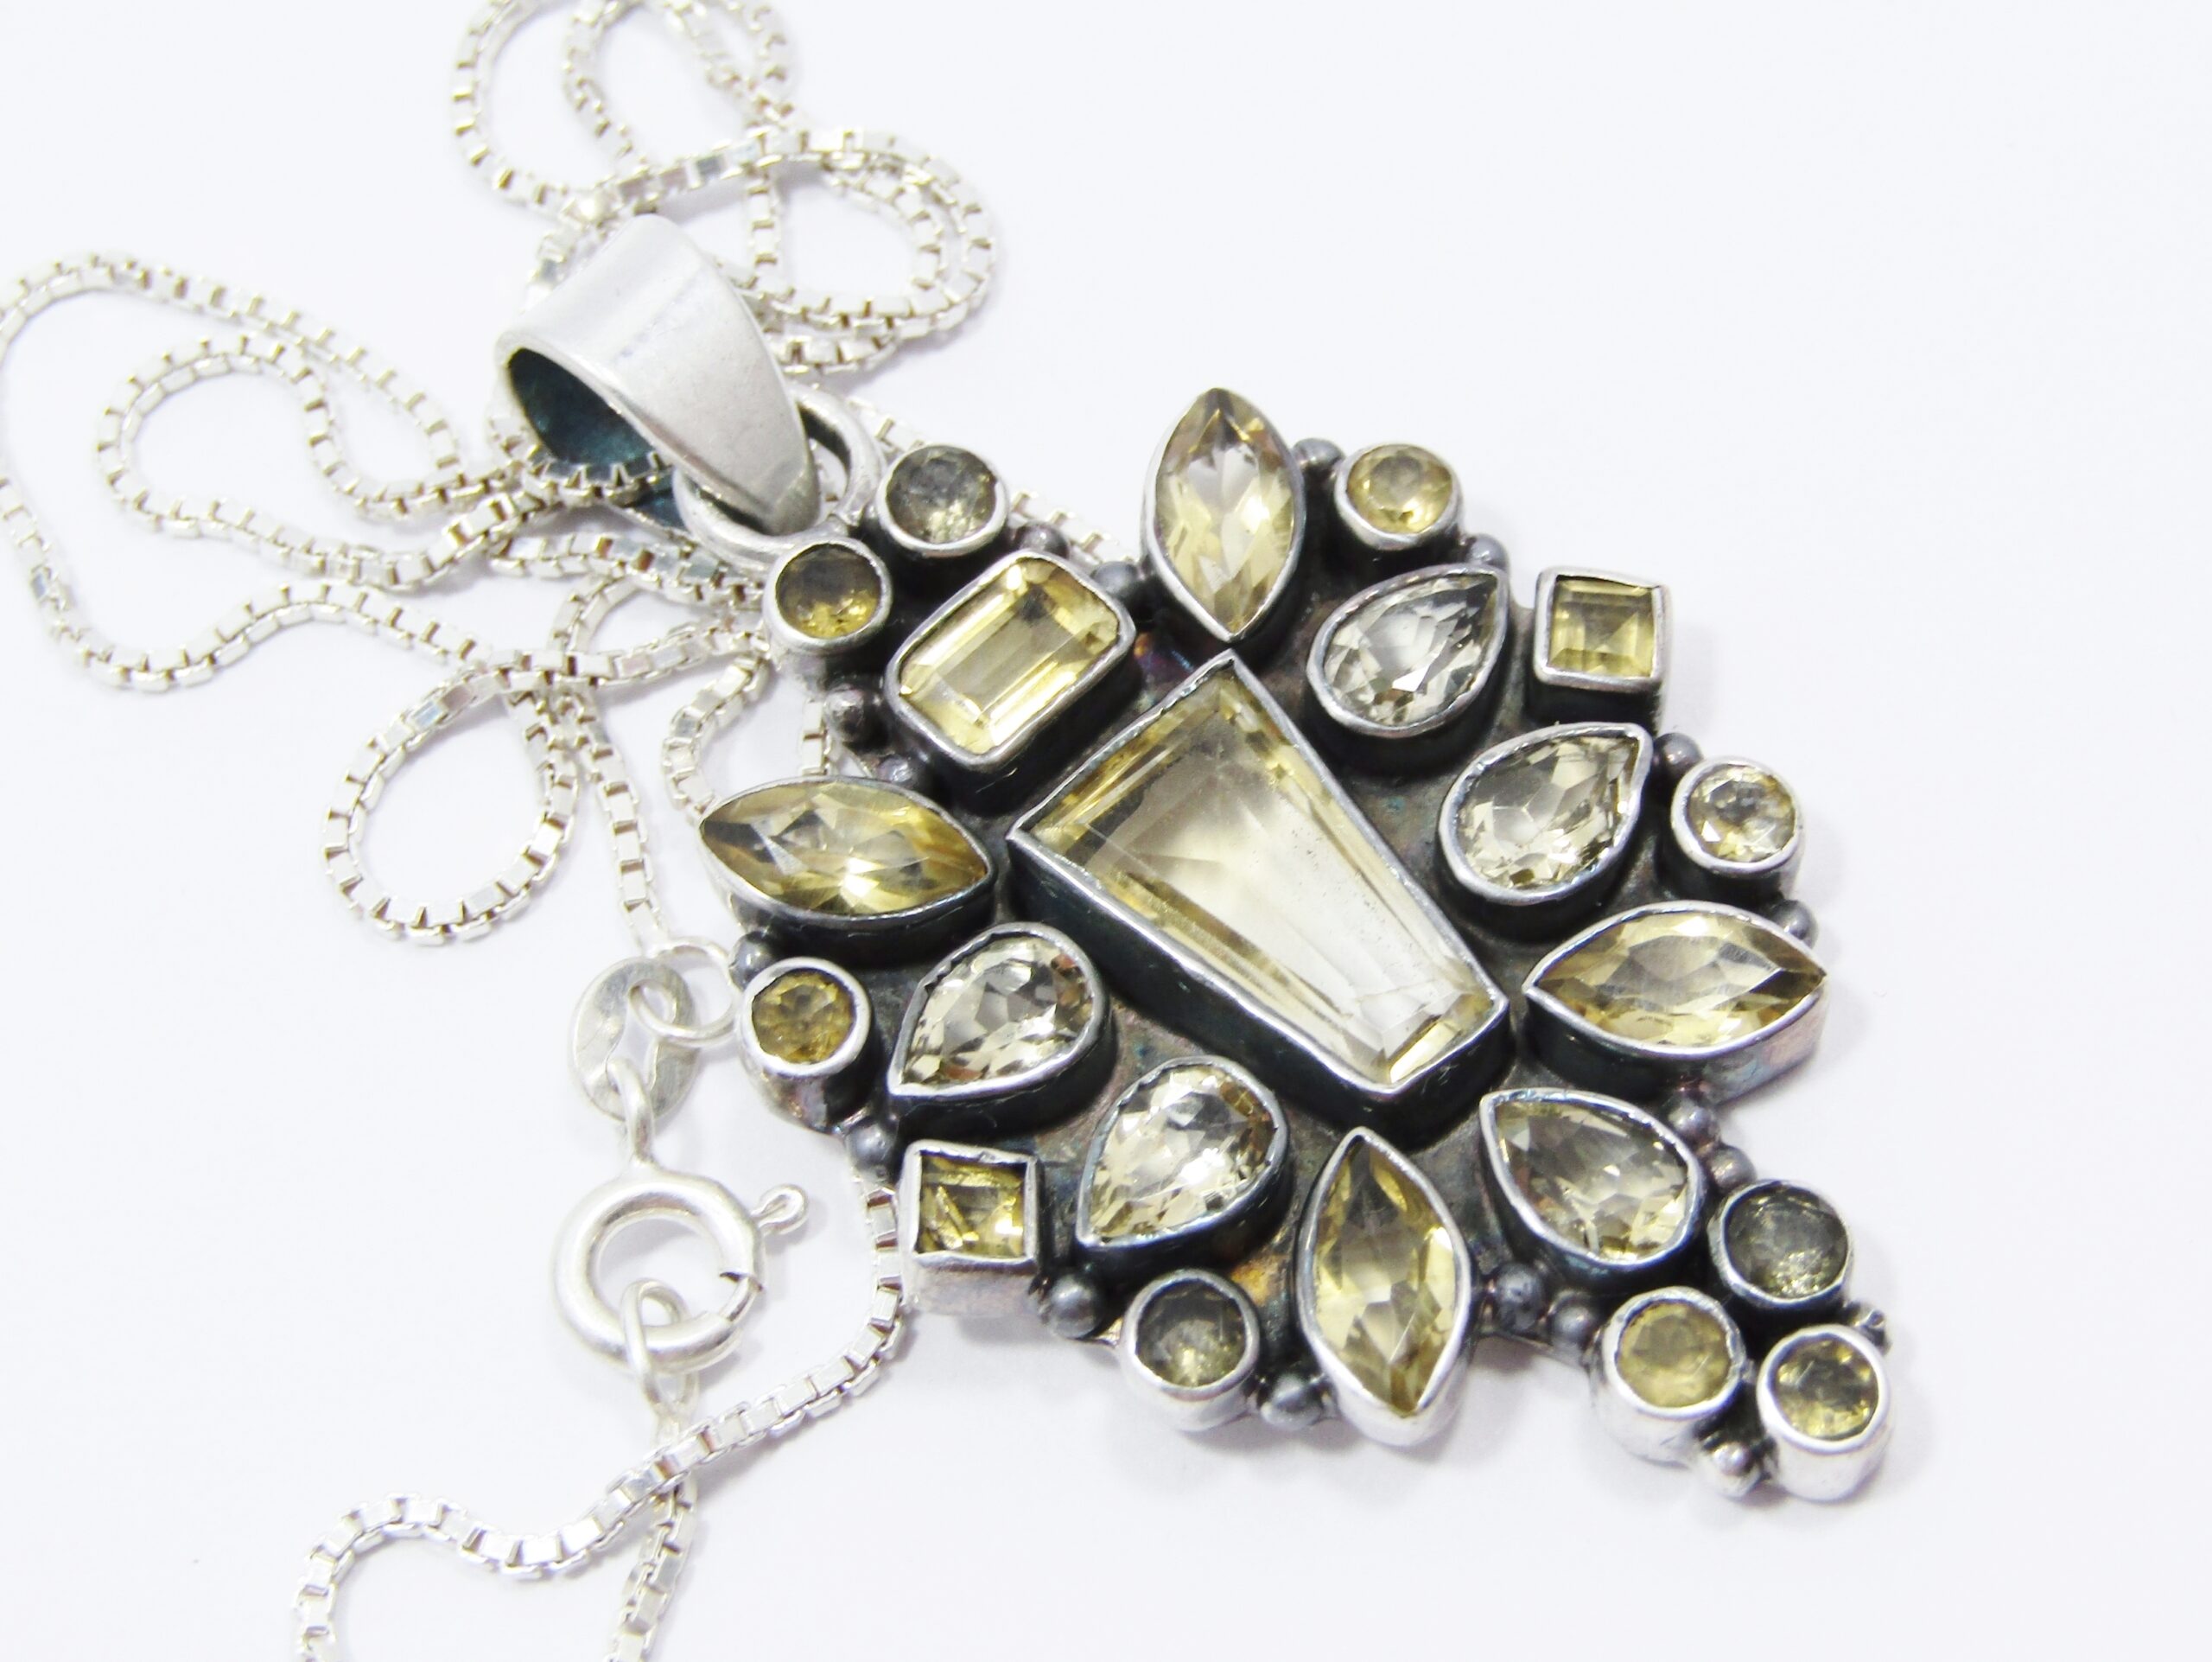 A Stunning Huge Citrine Gemstone Pendant on Chain in Sterling Silver.